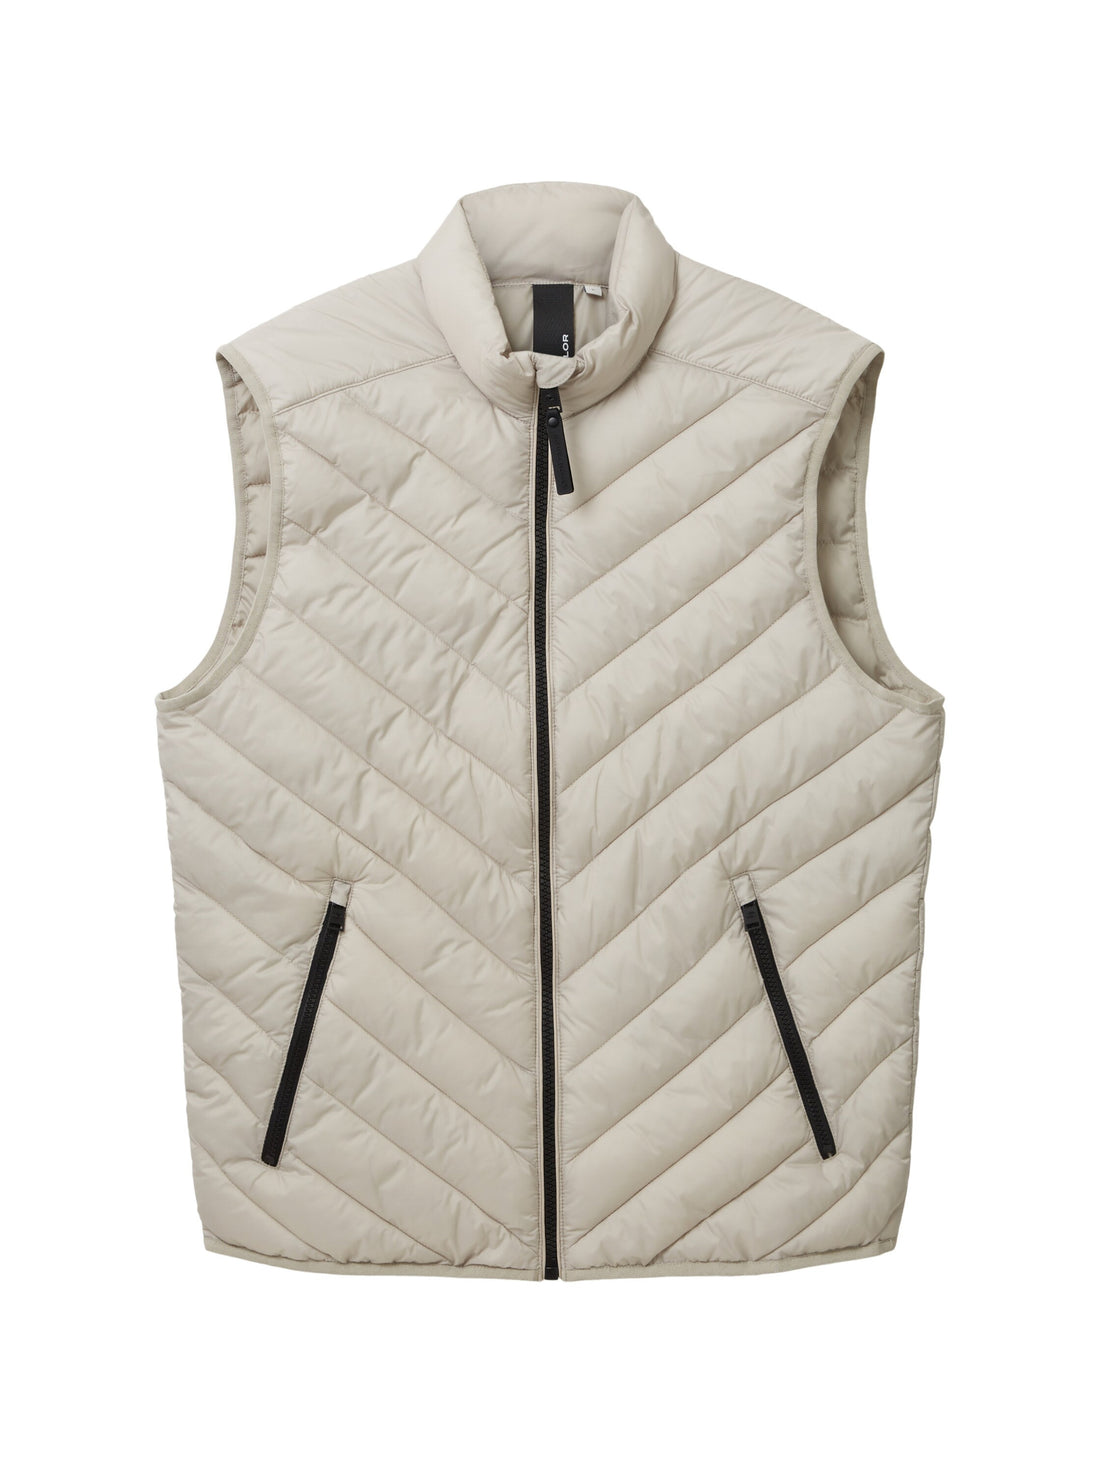 Quilted Puffer Light Weight Vest_1036072_26199_01